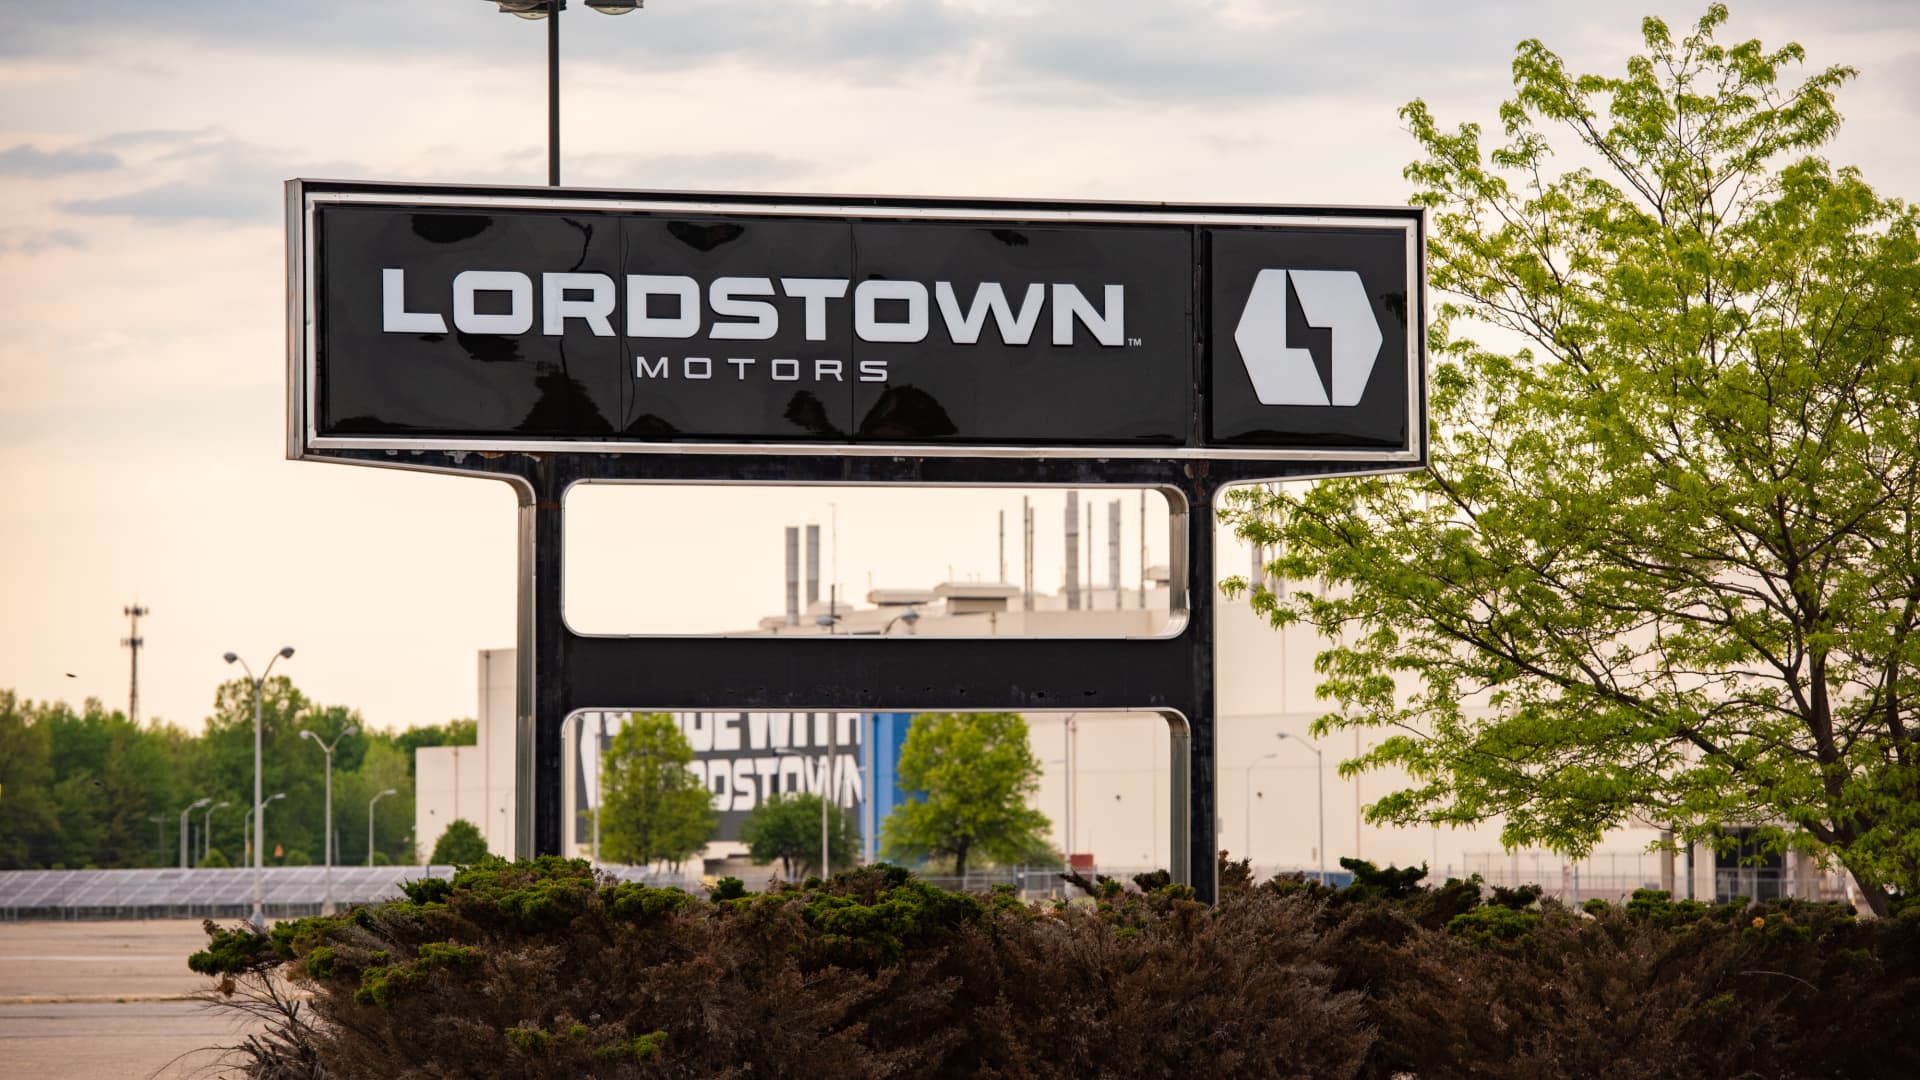 Signage outside Lordstown Motors Corp. headquarters in Lordstown, Ohio, on Saturday, May 15, 2021.